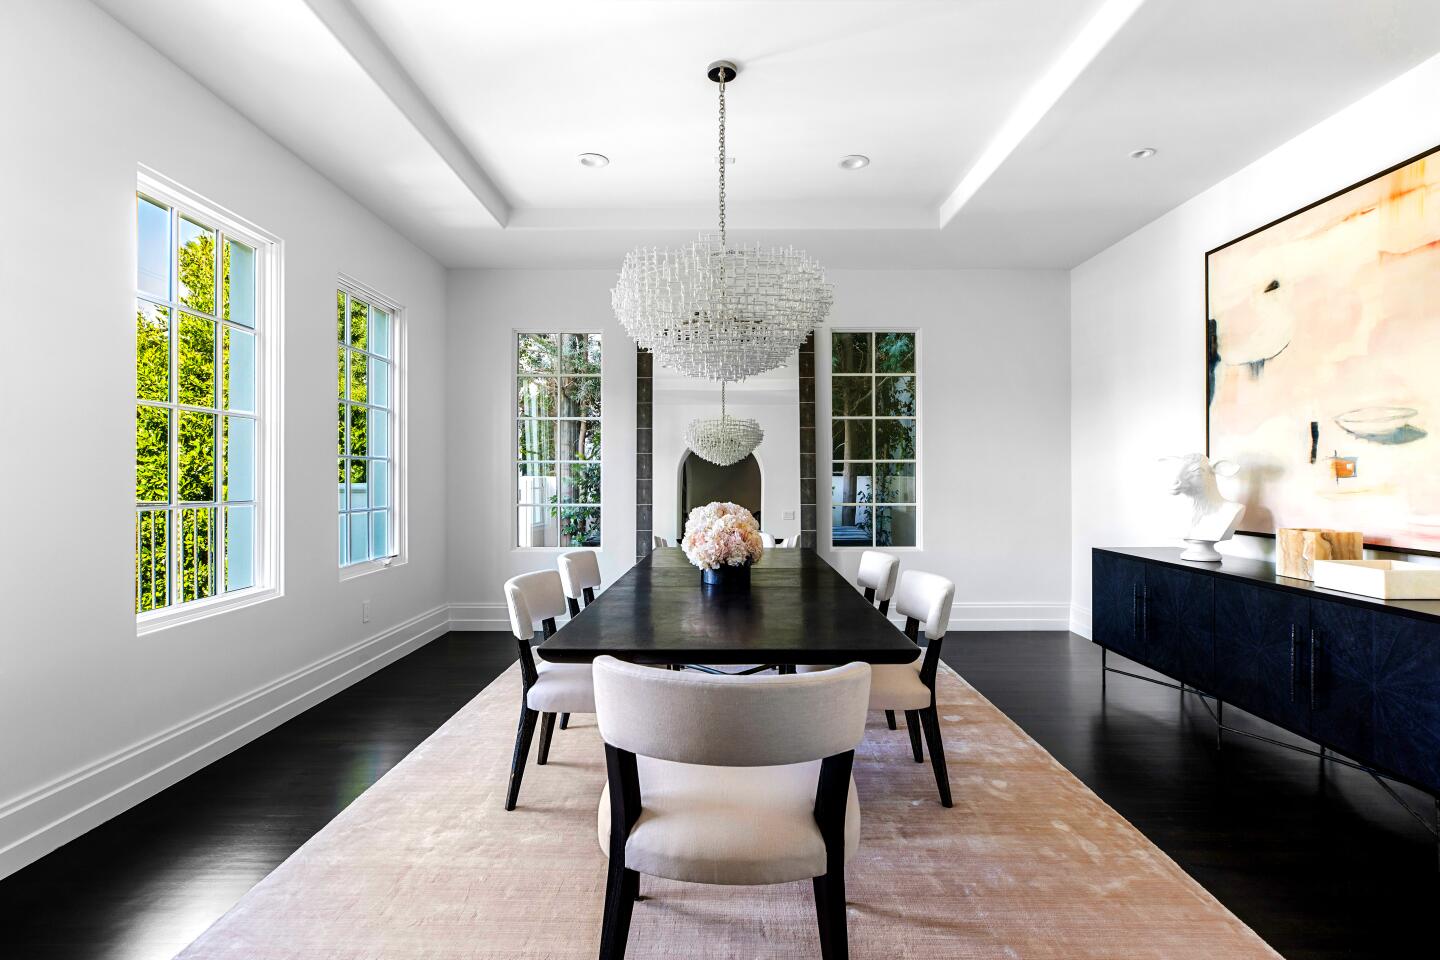 Polished to a fine sheen, the designer-done interiors feature dark wood floors that stand out against white walls.